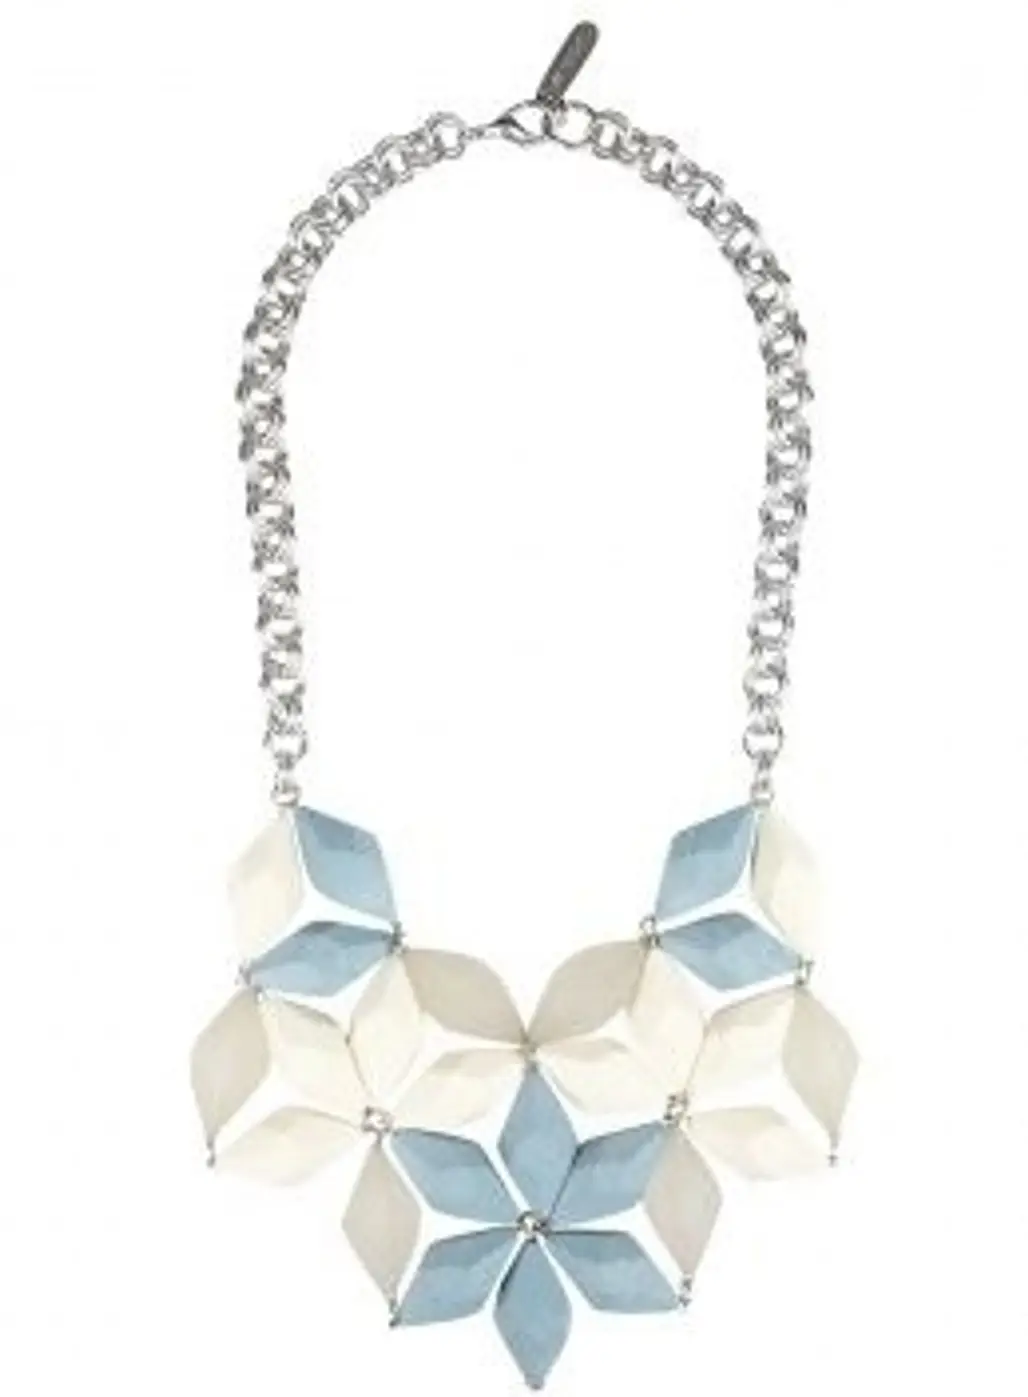 Sportmax Blue Valdai Perspex Geo Necklace - Girly-girl Must-Have Piece of Perspex Jewelry